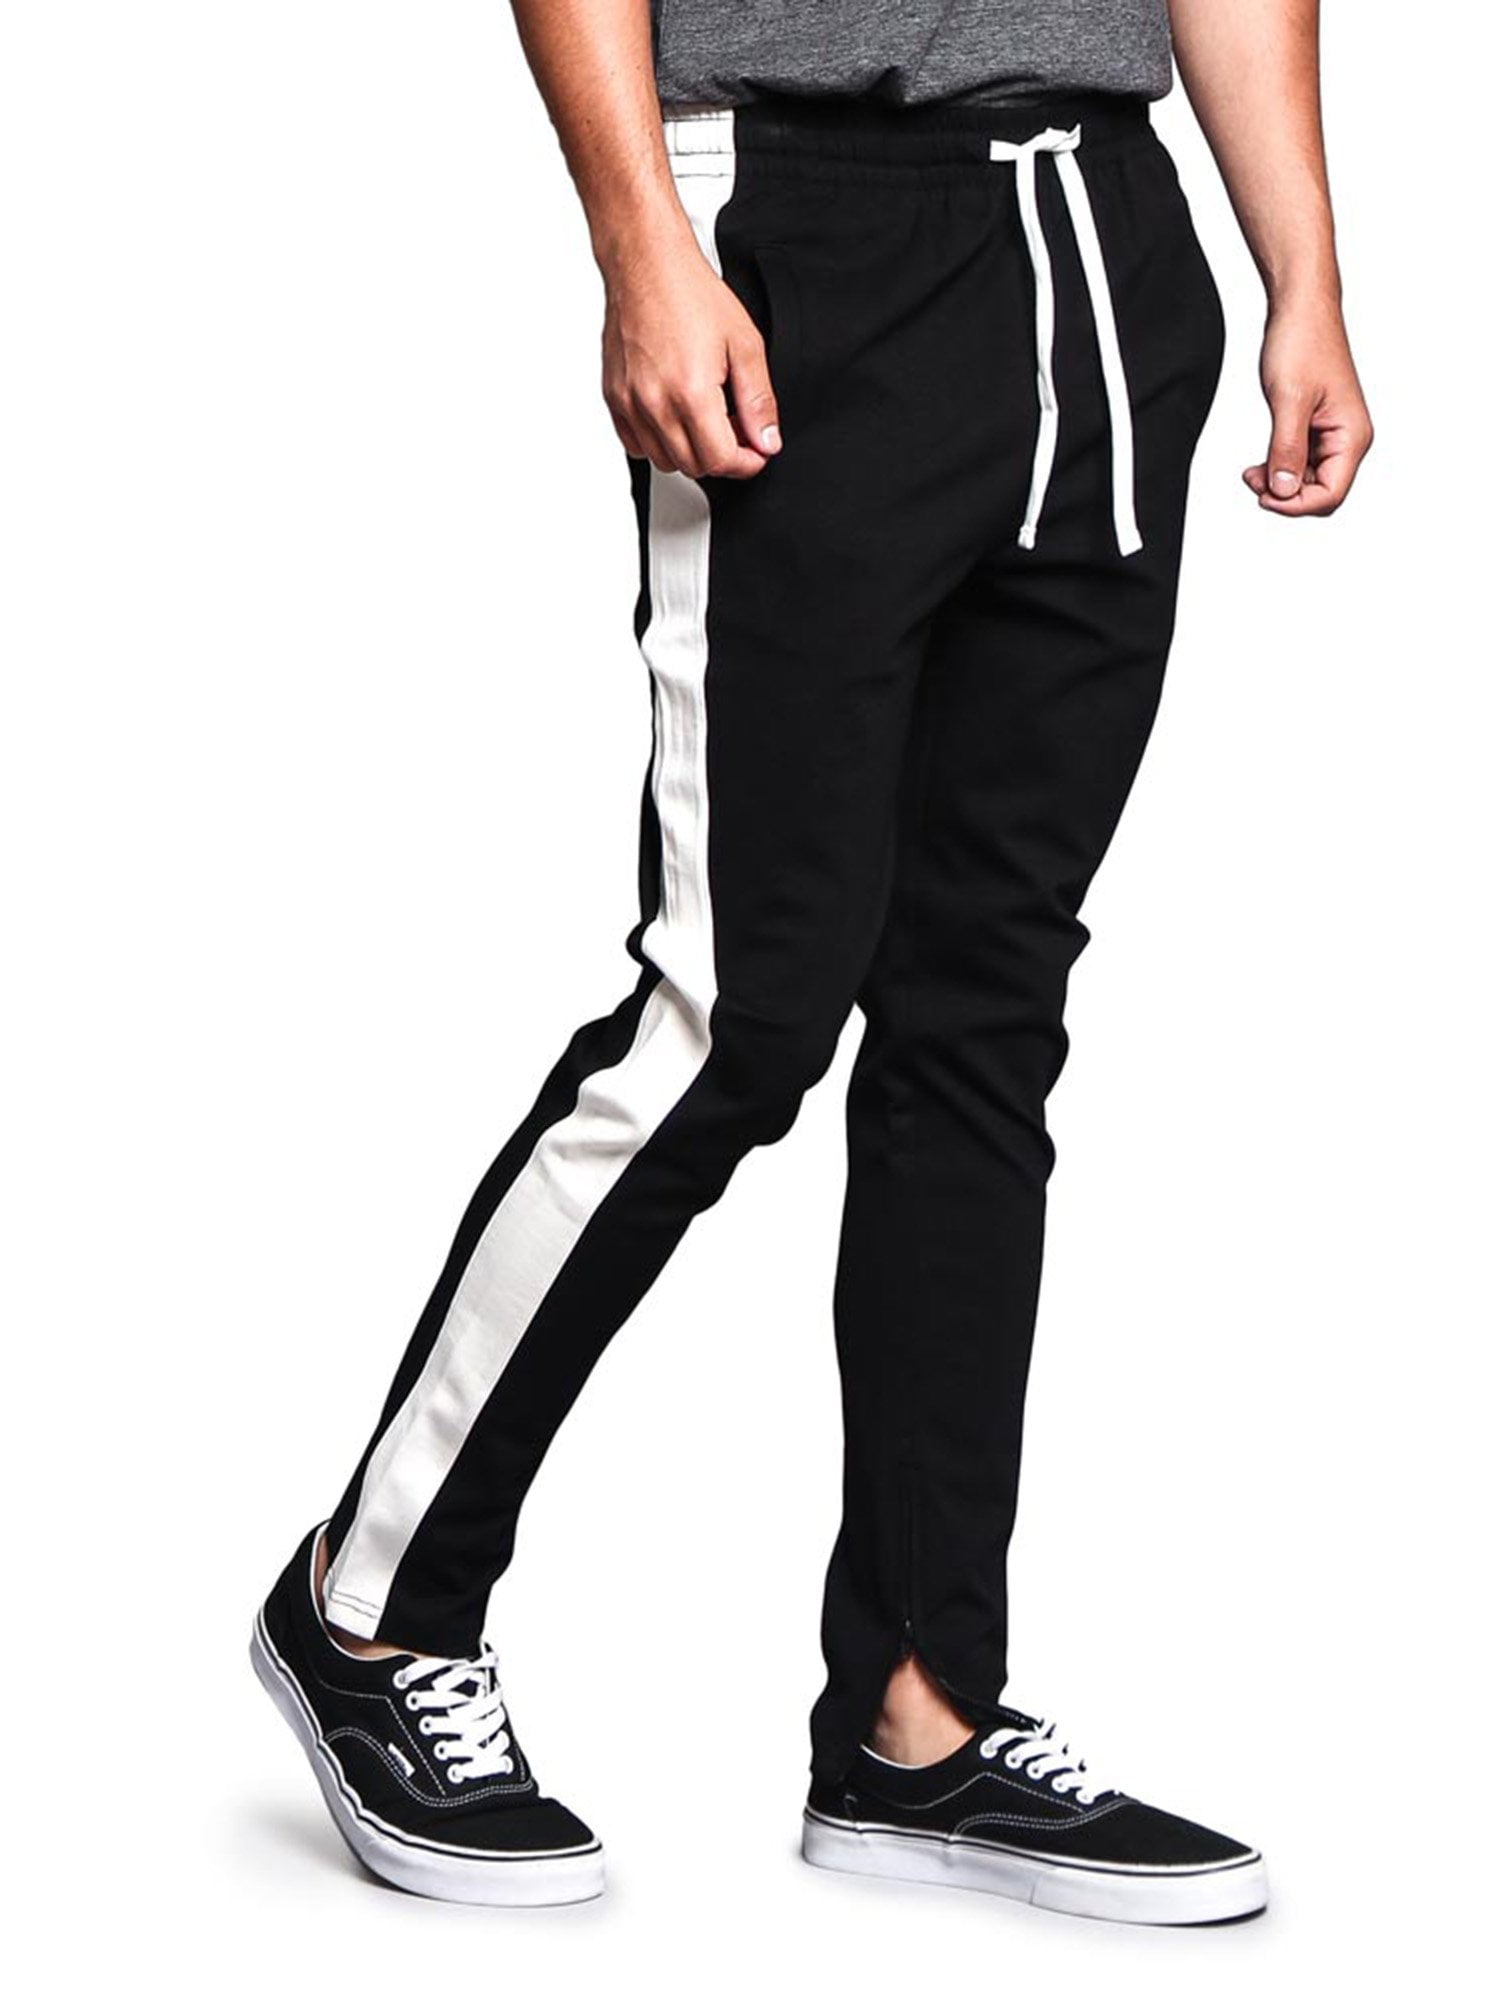 G-Style USA Men's Hip Hop Slim Fit Track Pants - Athletic Jogger with Side  Stripe - Black/Off-White - 5X-Large